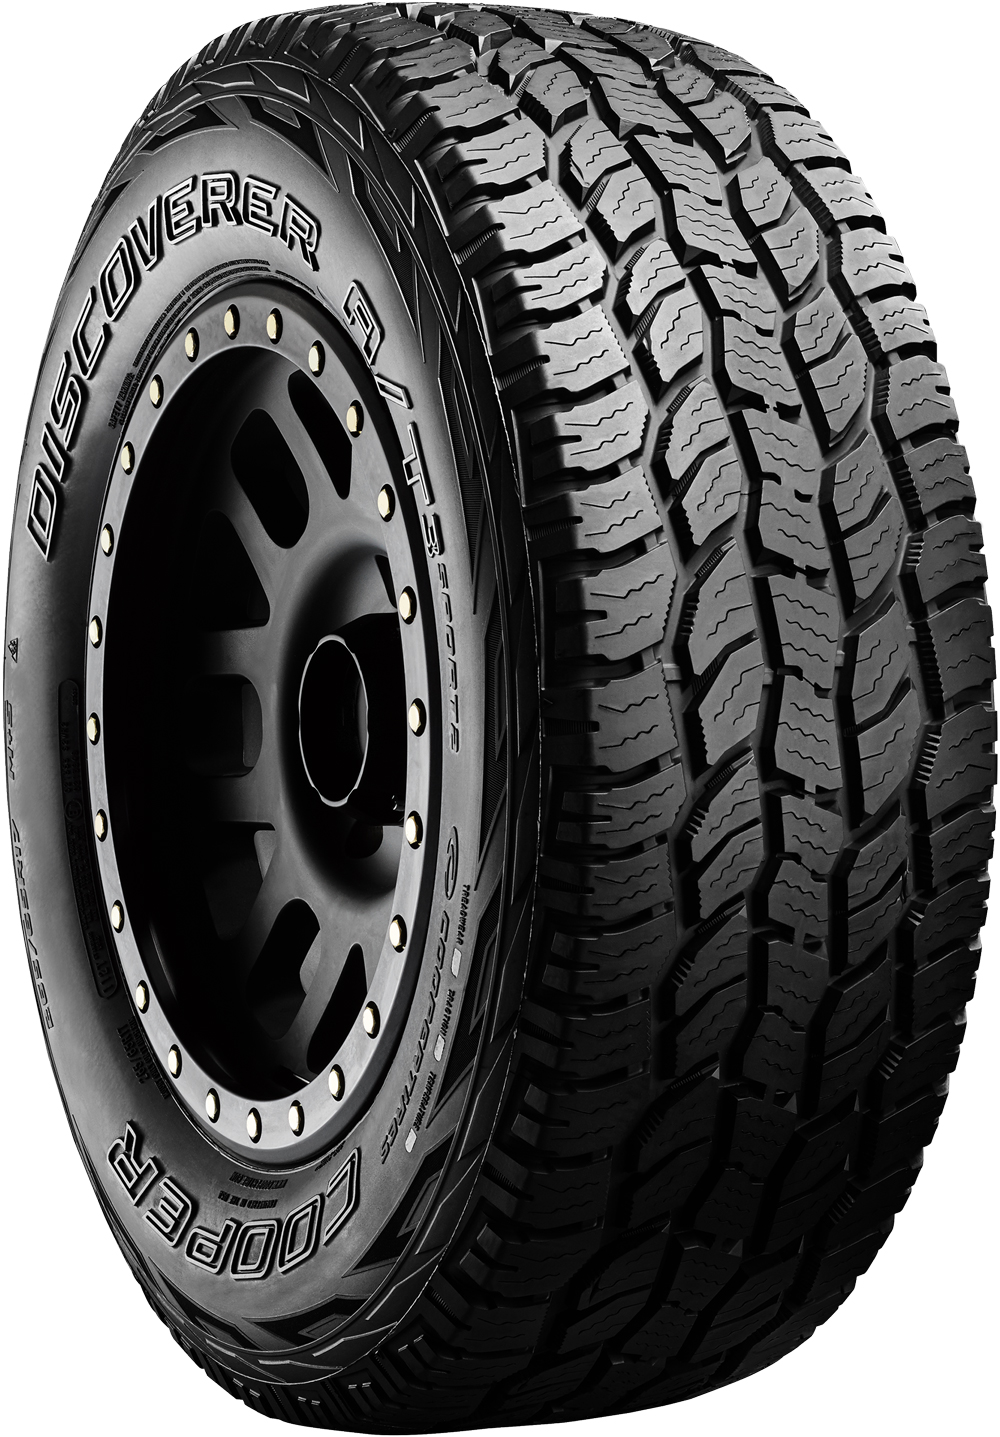 Джипови гуми COOPER DISCOVERER A/T3 SPORT 2 BSW XL 205/80 R16 104T